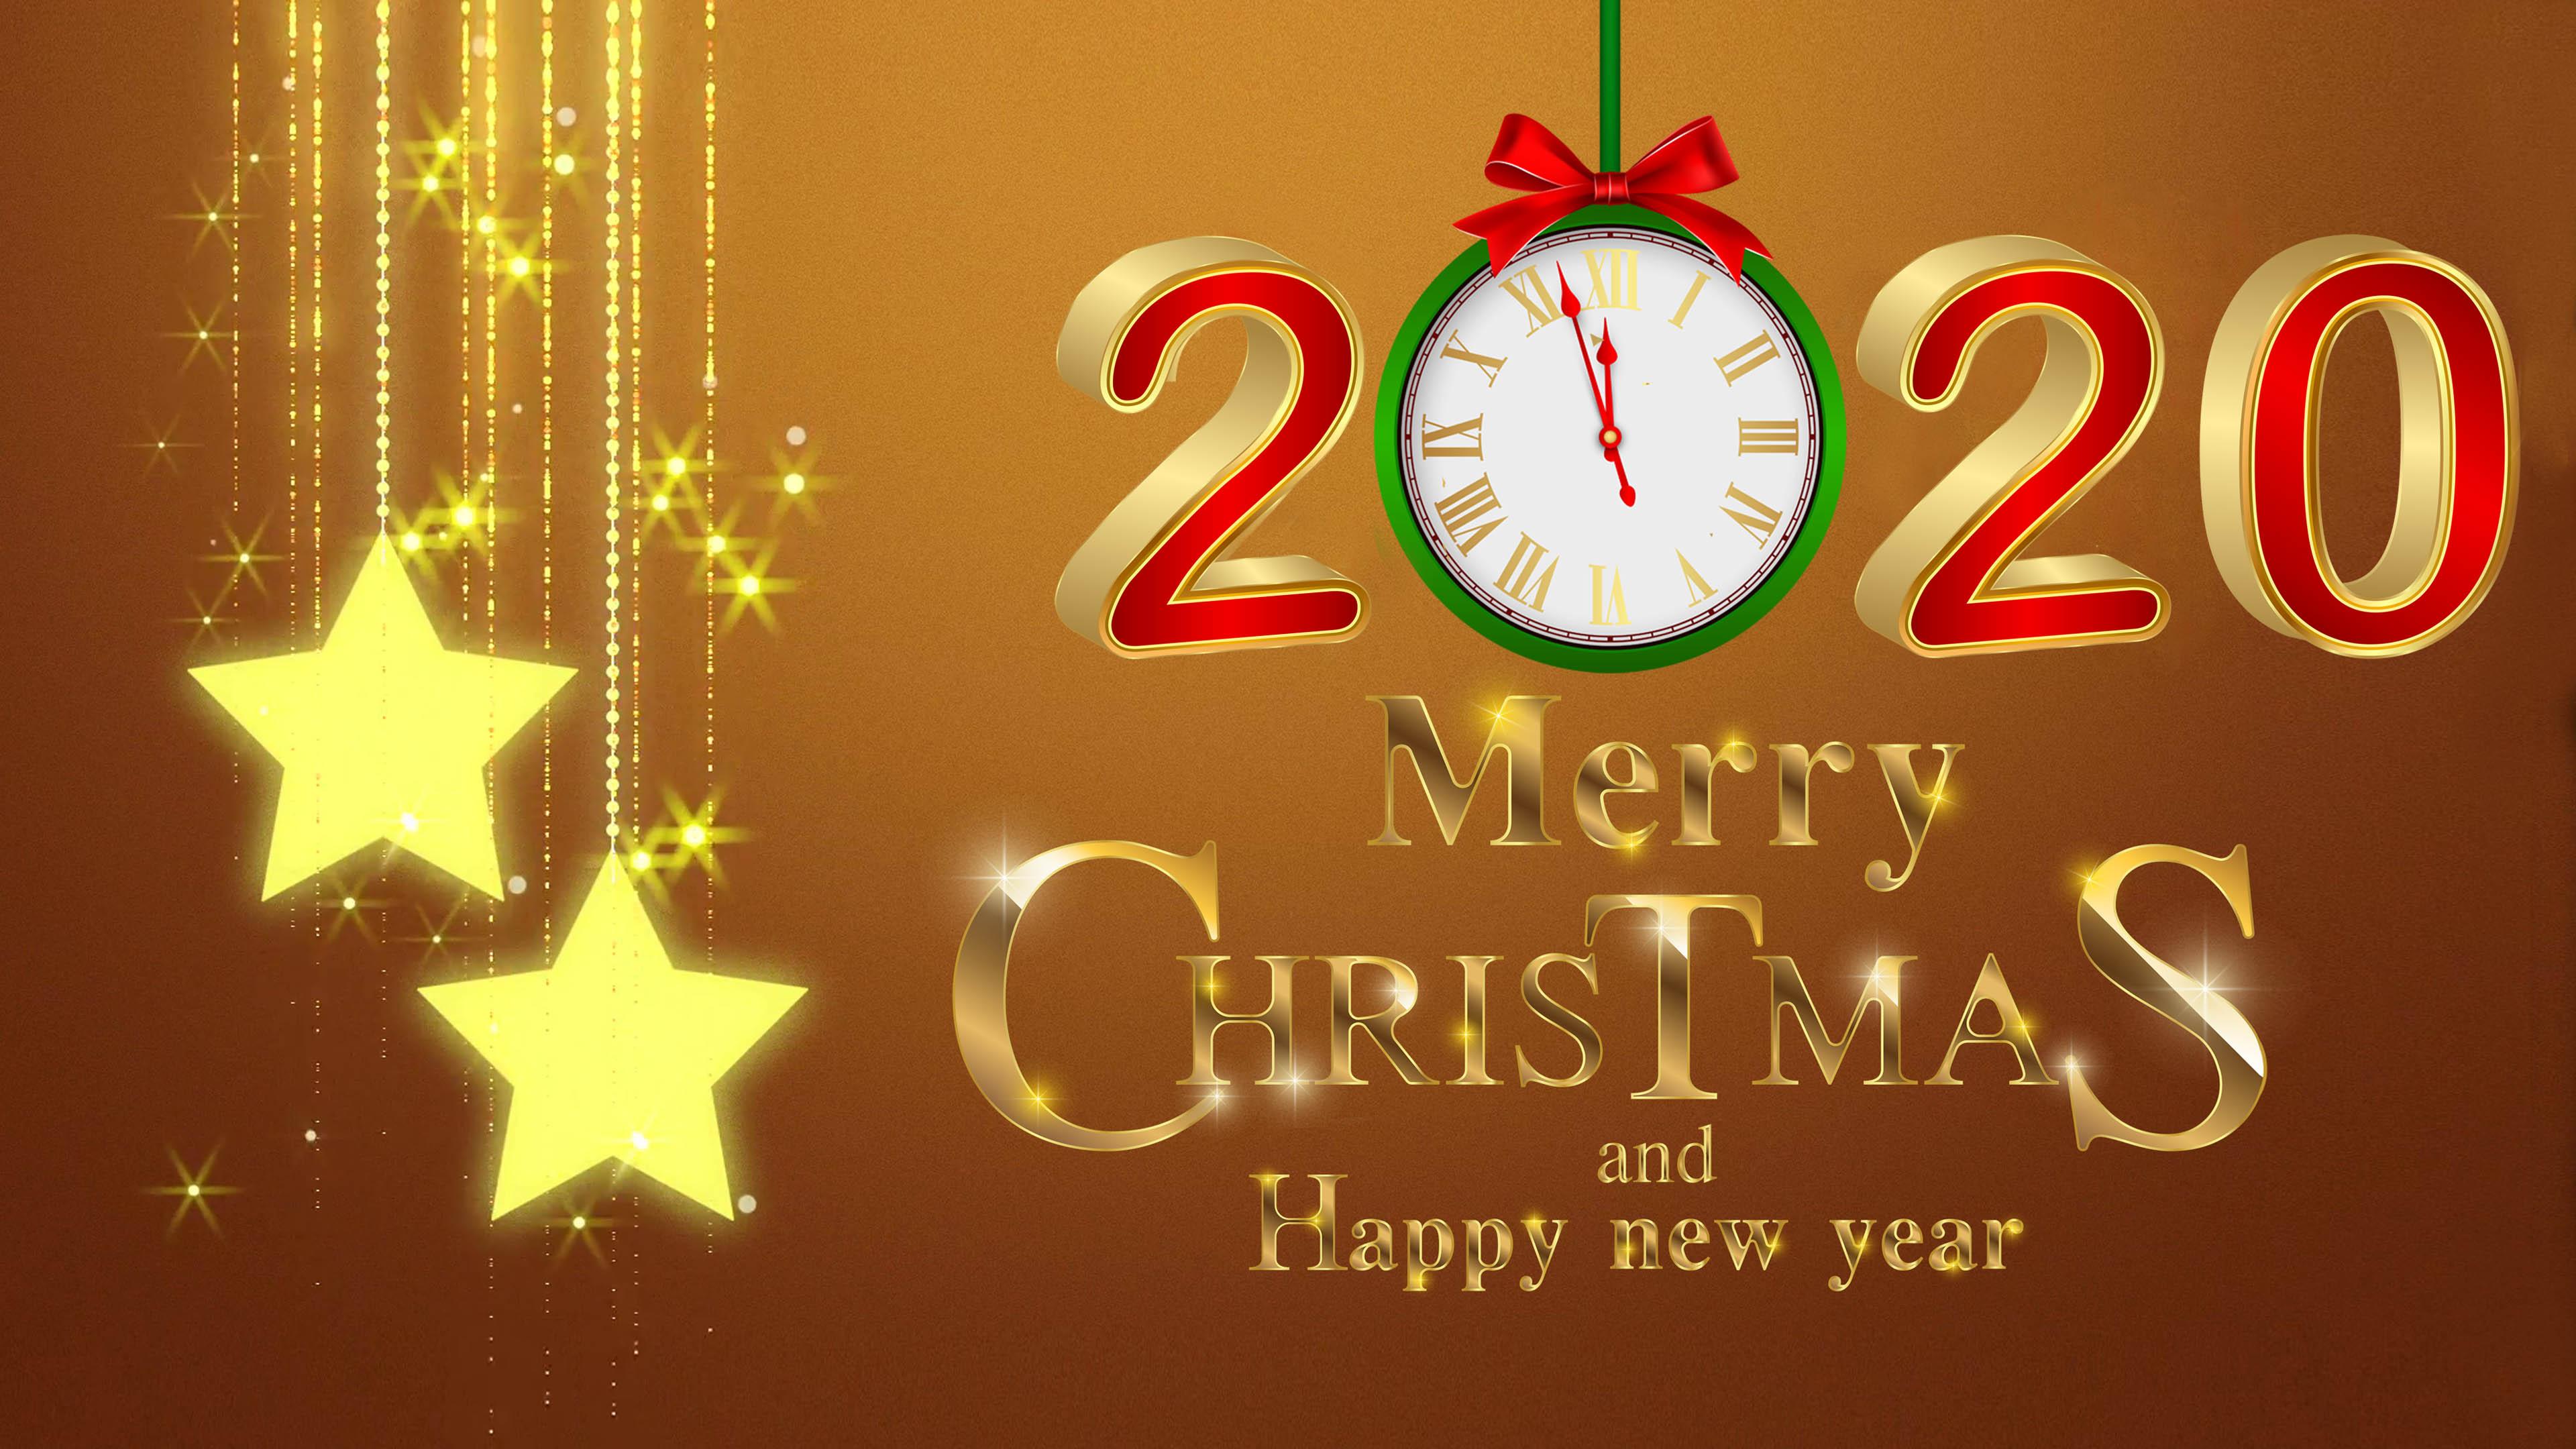 Merry Christmas And Happy New Year 2020 Gold 4k Ultra HD